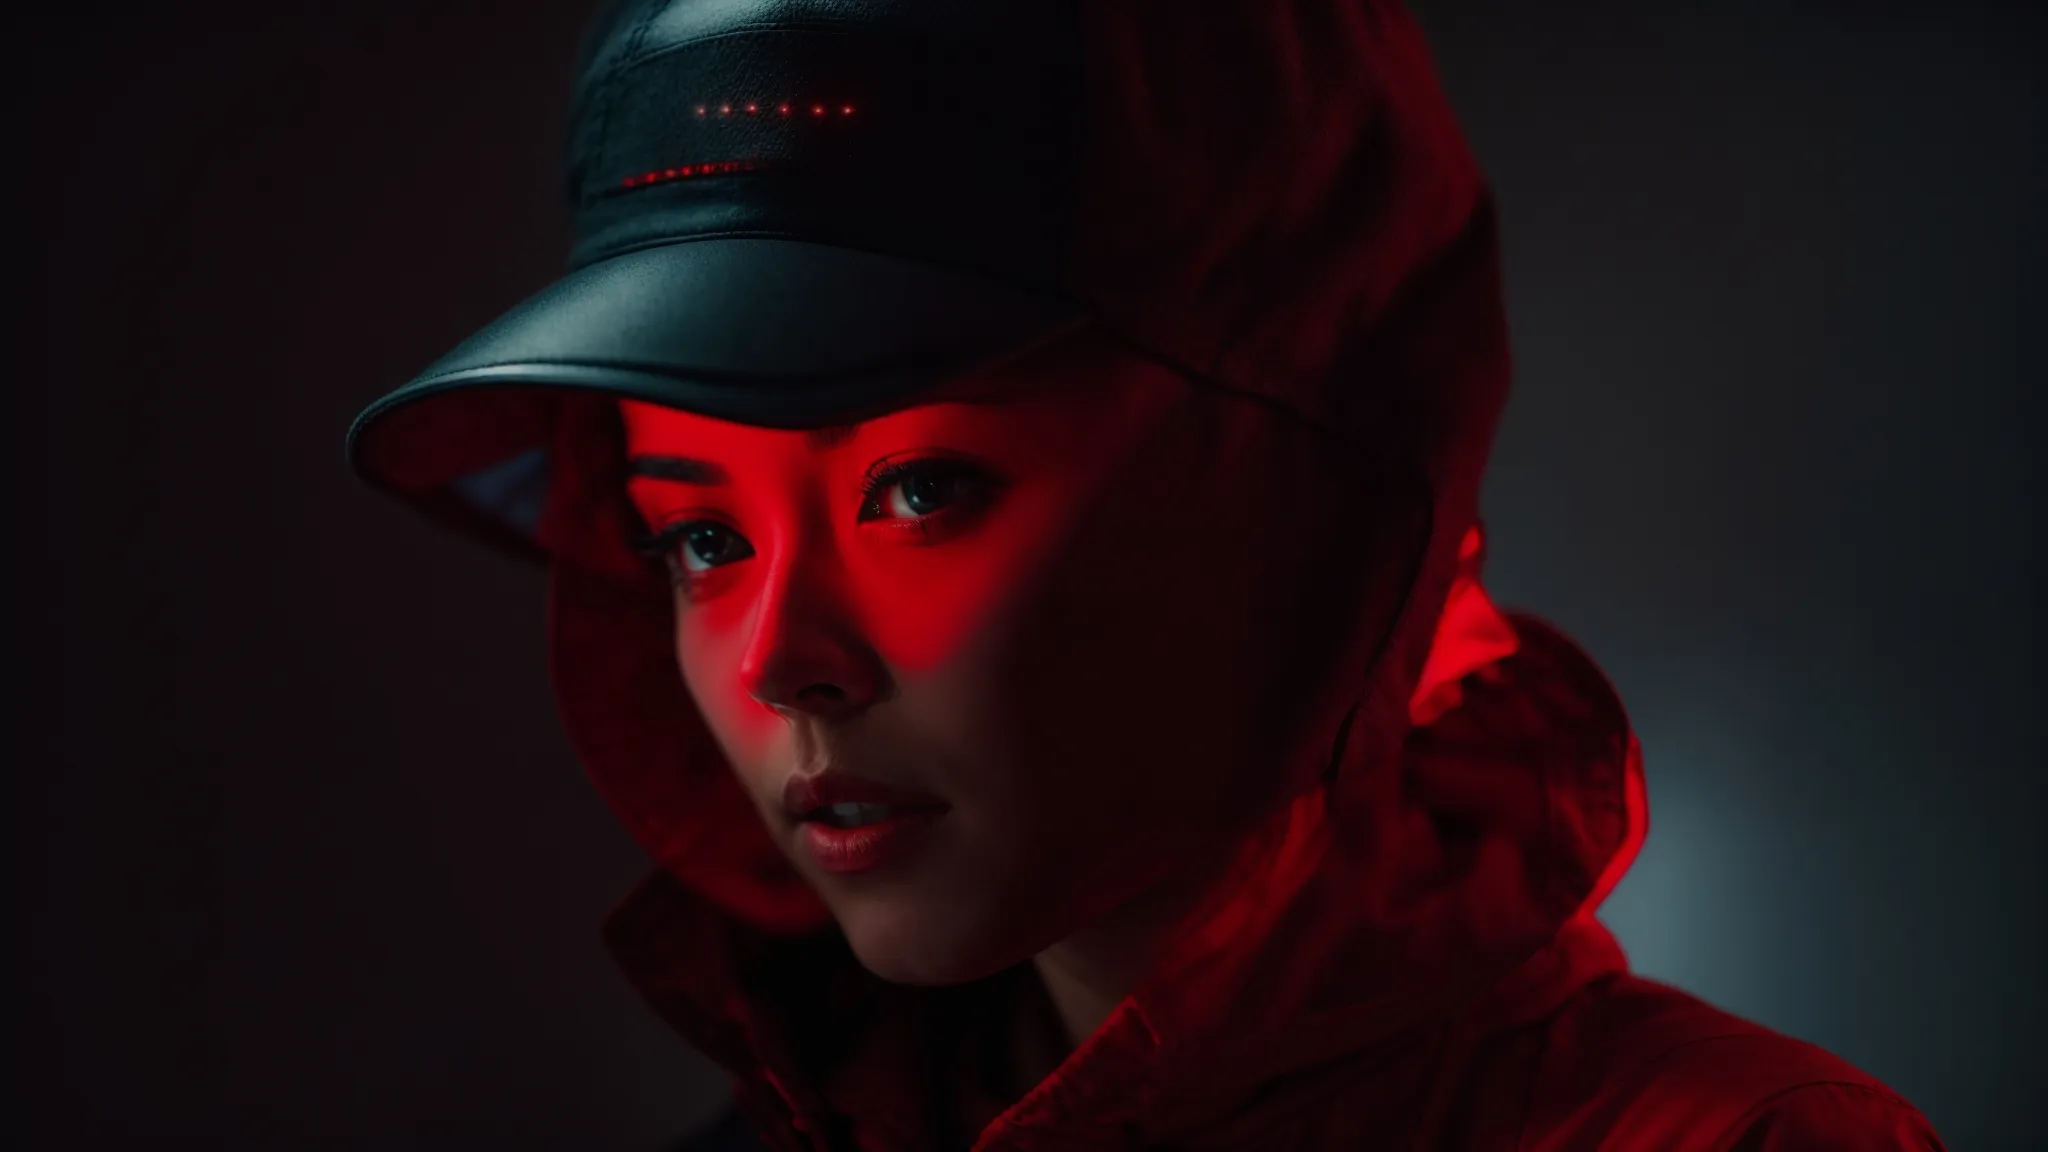 a person wearing a futuristic cap emits a soft red glow over their entire head.